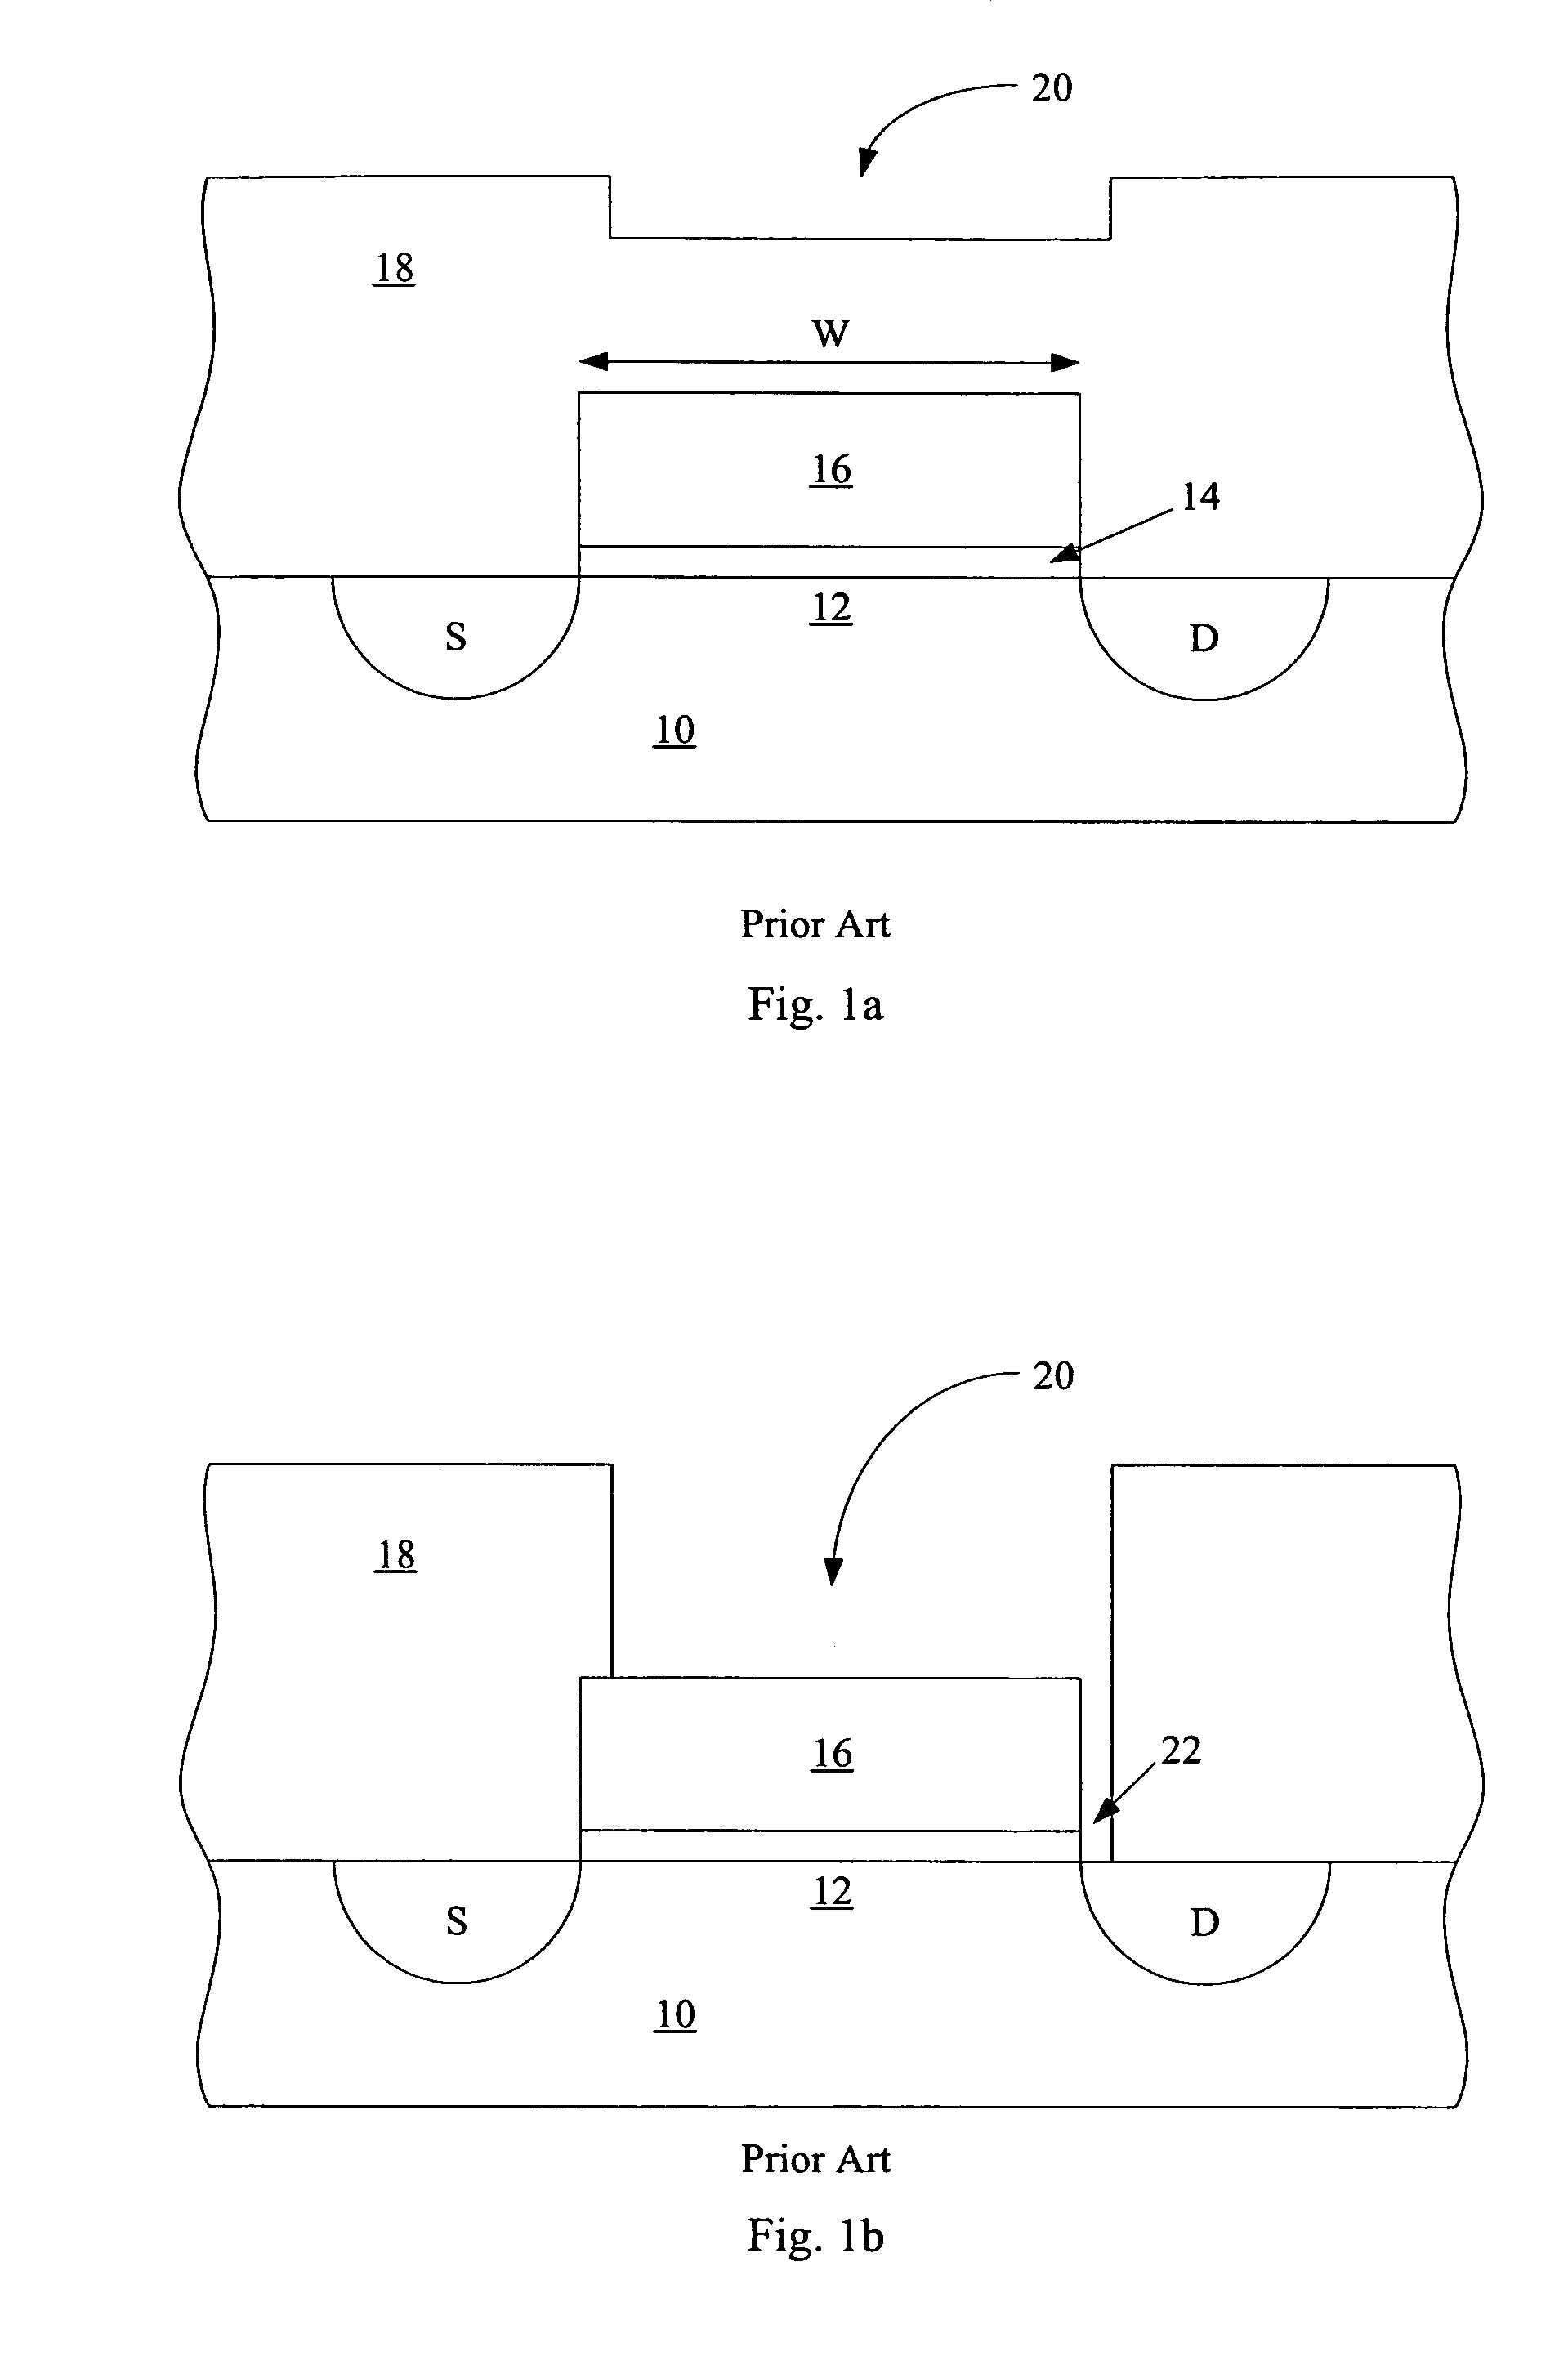 Method for reducing dielectric overetch using a dielectric etch stop at a planar surface